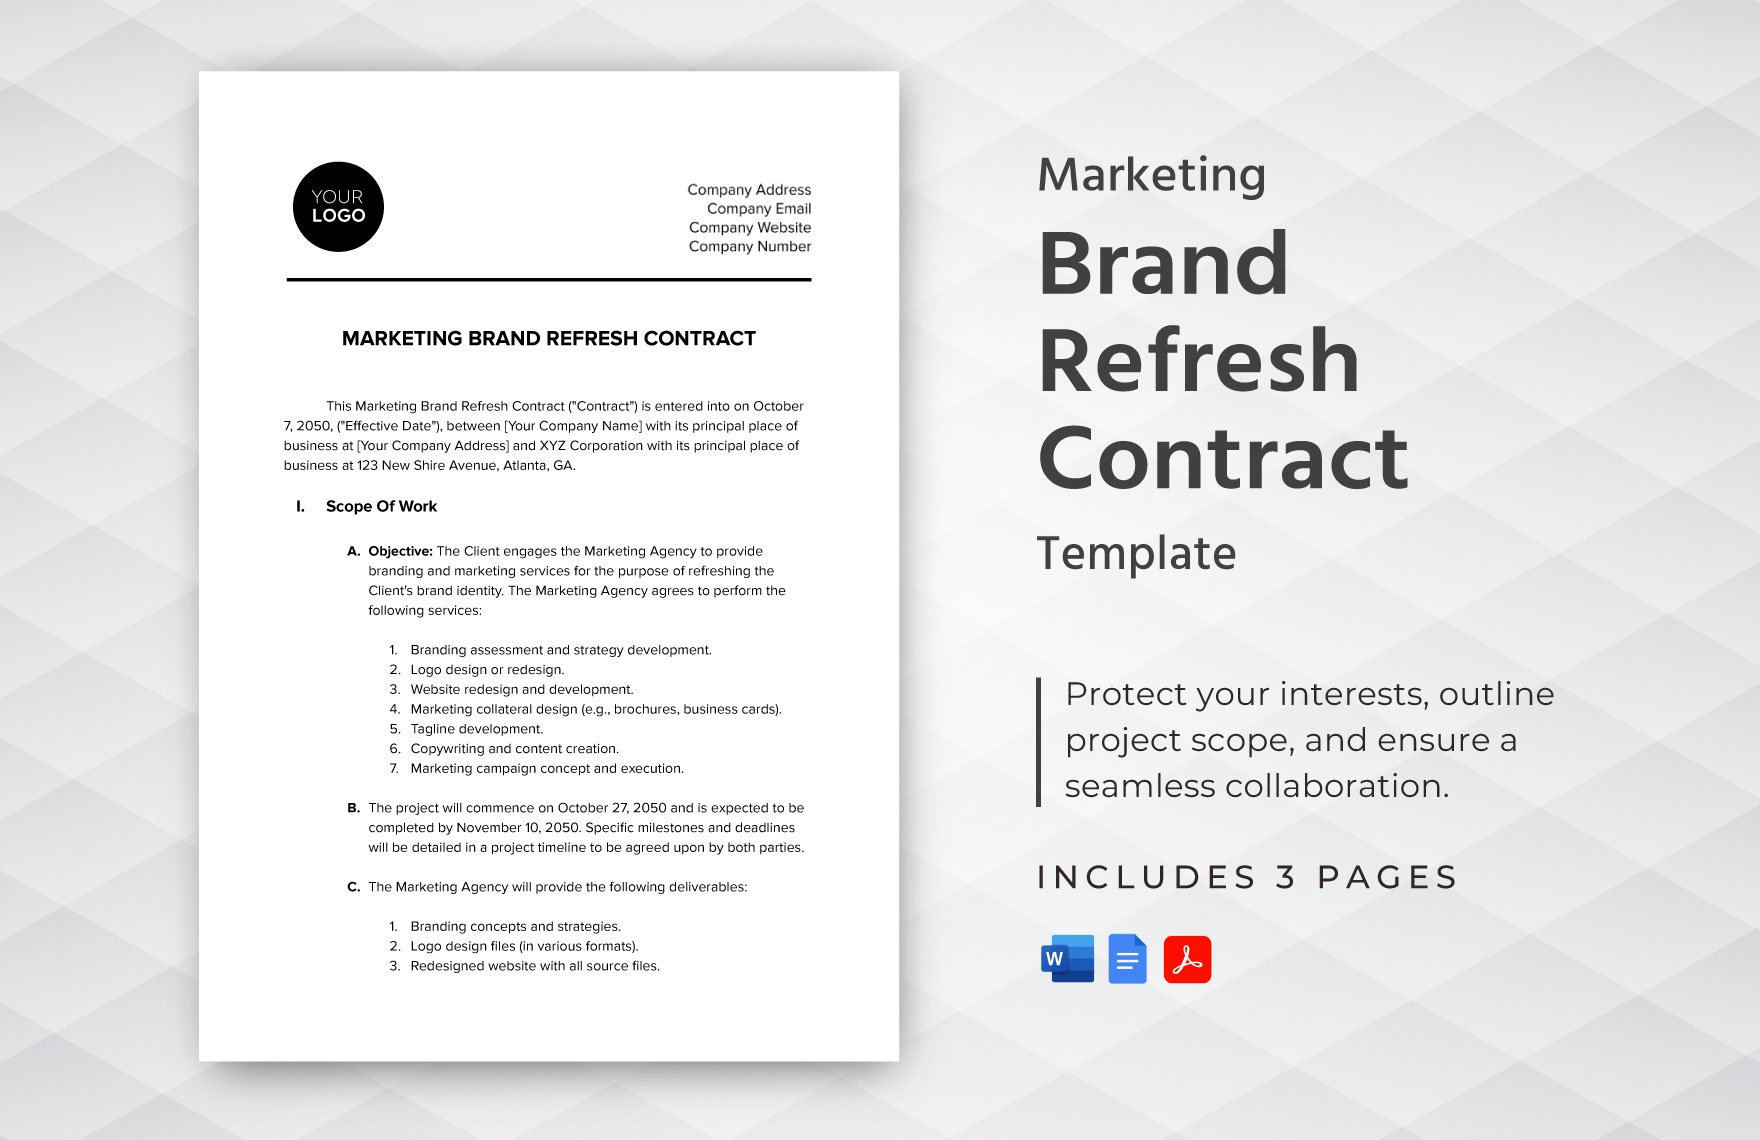 Marketing Brand Refresh Contract Template in Word, Google Docs, PDF